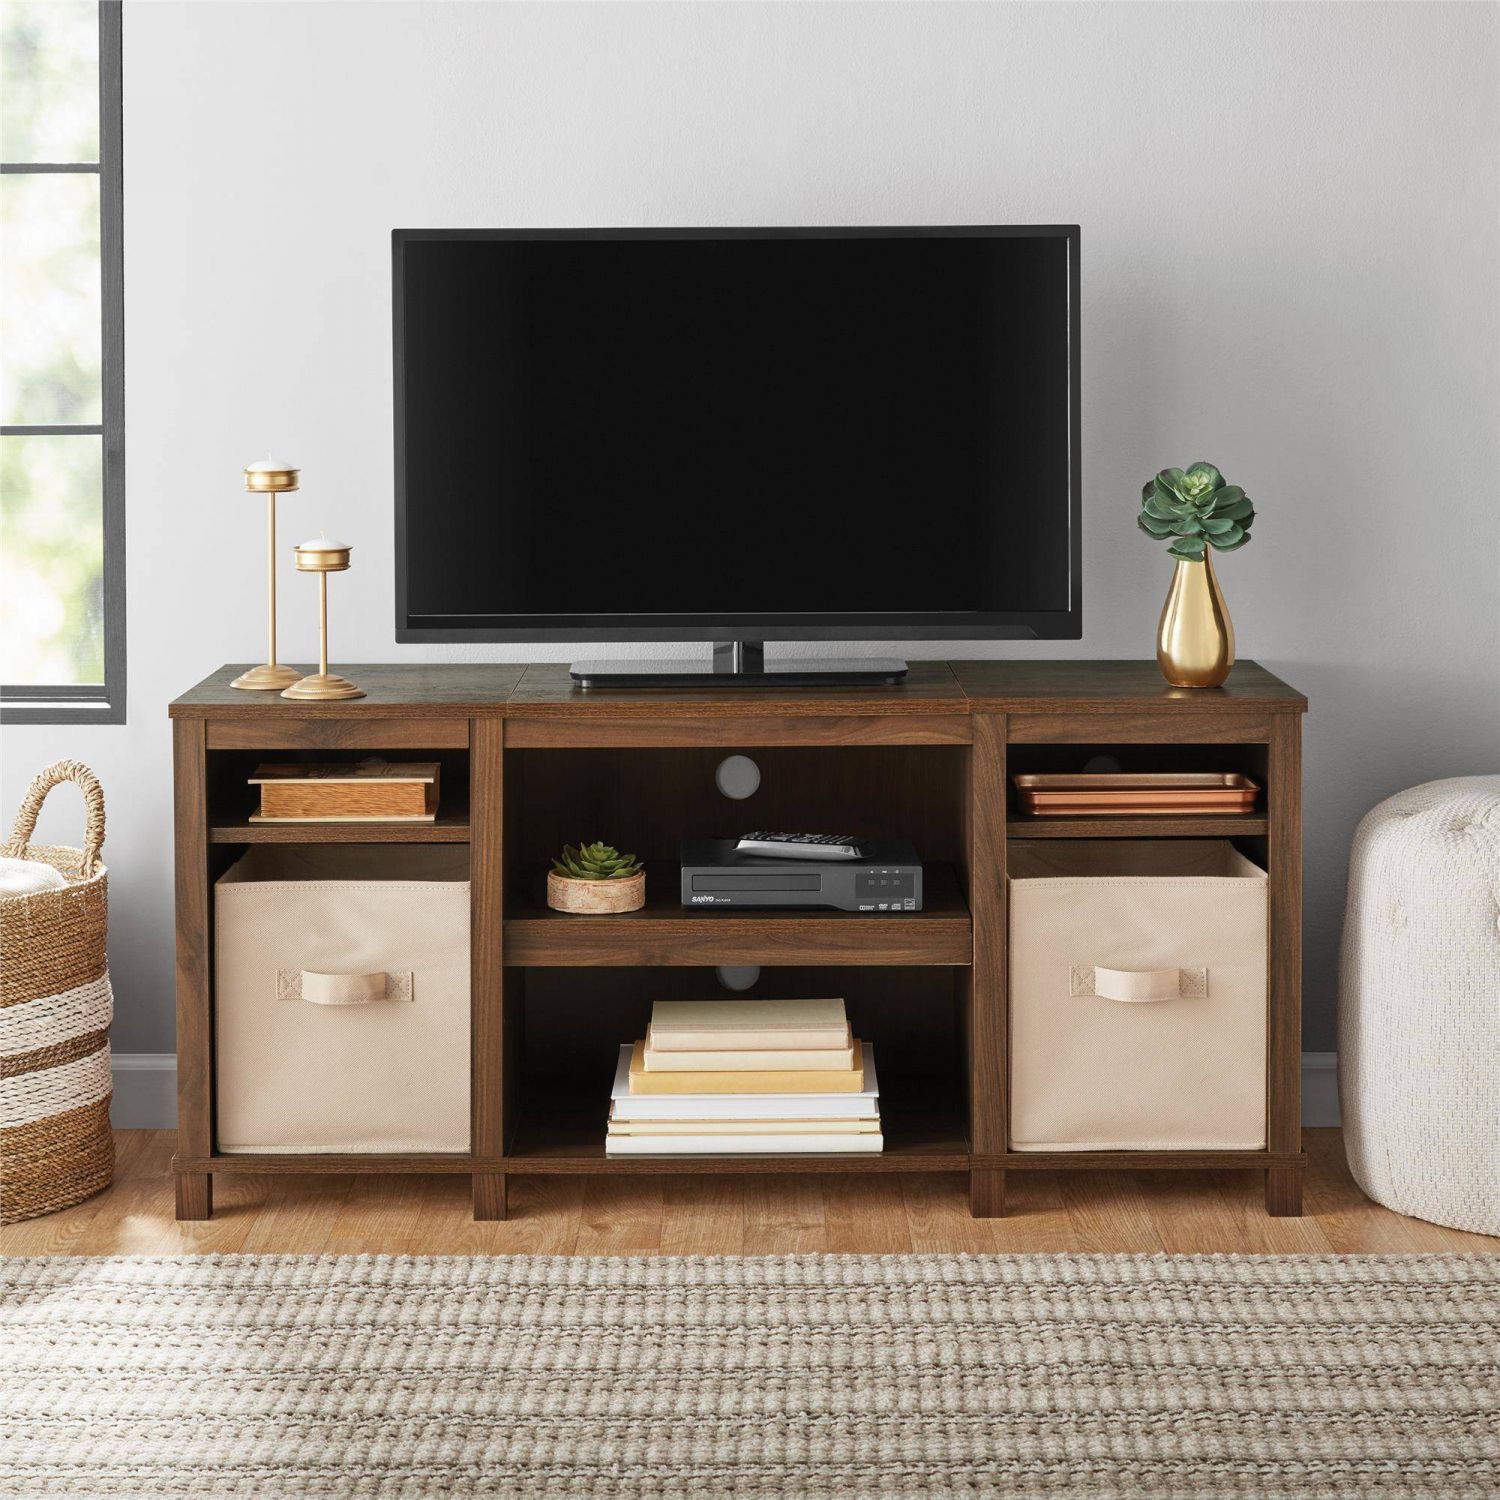 50 Inch Solid Wood Tv Stand Flat Screen Console Modern In Modern Wooden Tv Stands (View 5 of 15)